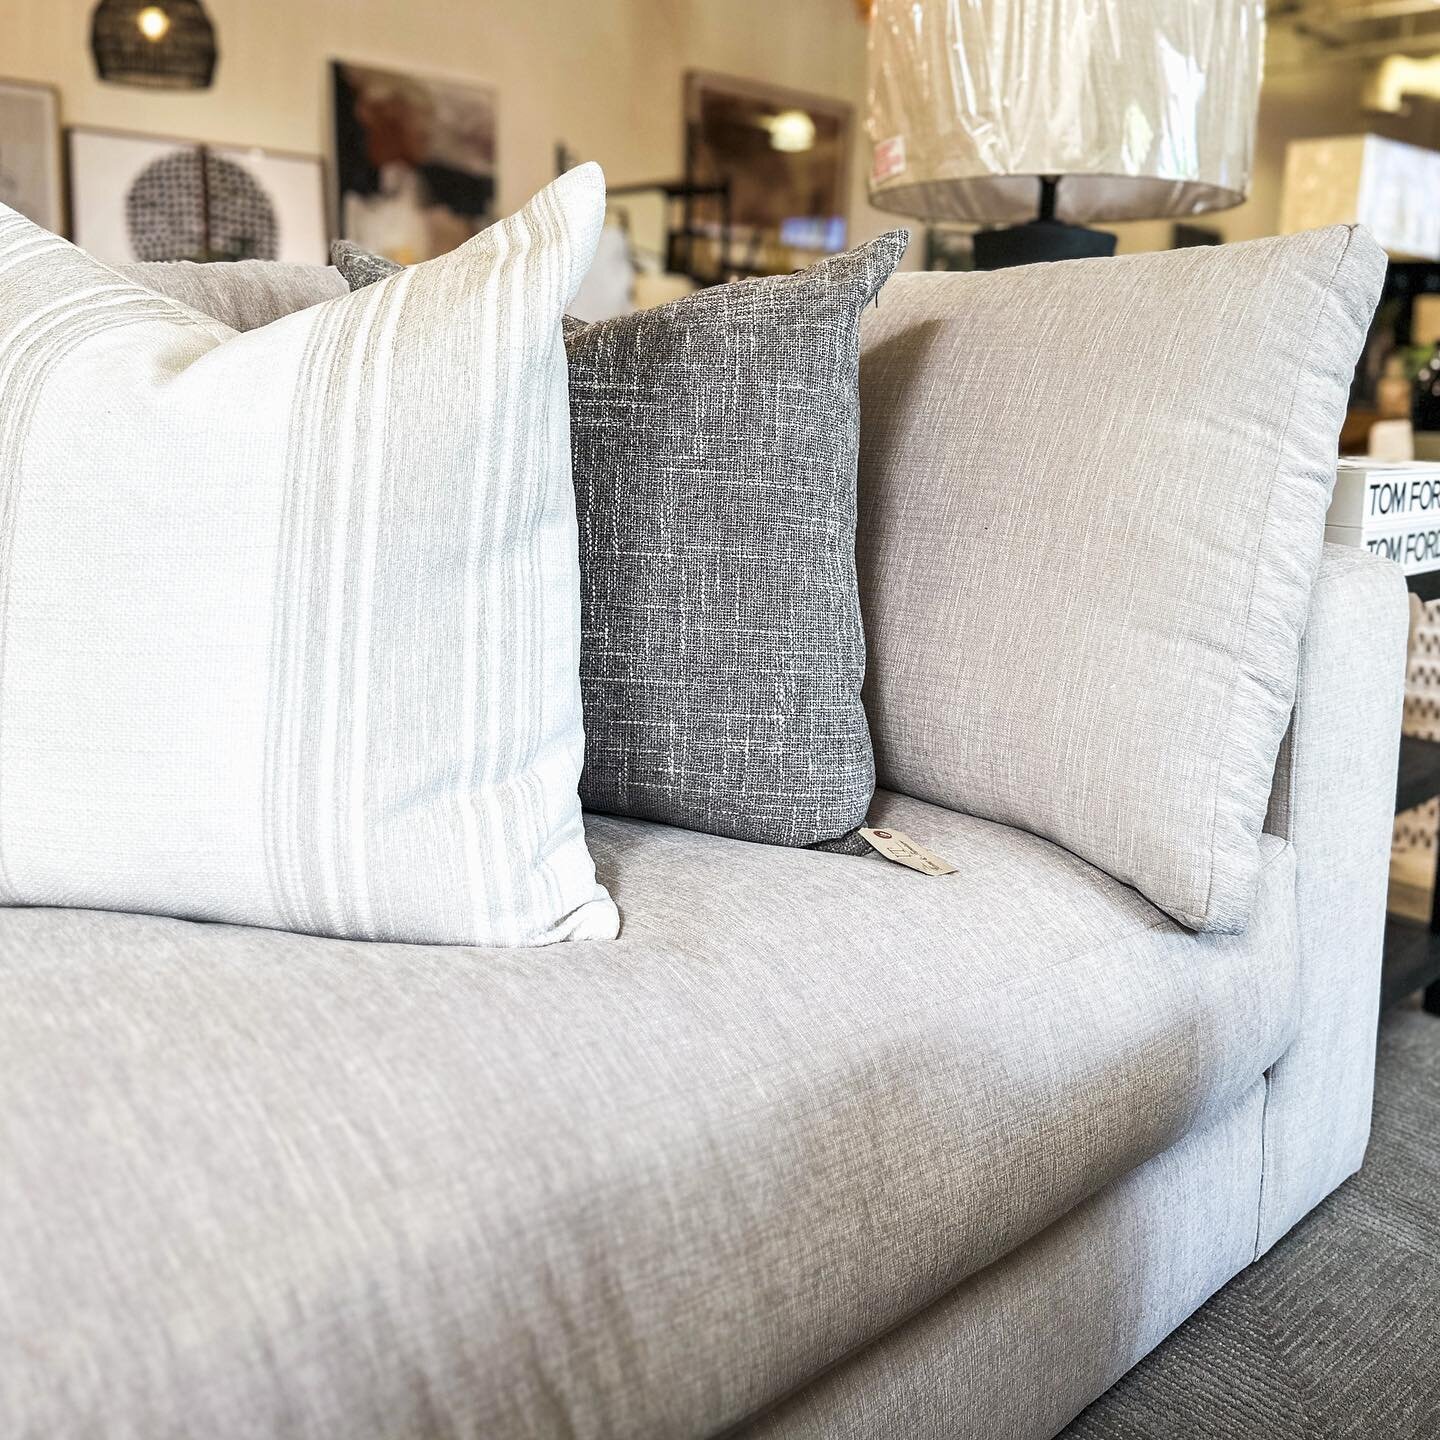 Floor model sofas are best paired with fresh new pillows. 
Take 50% off all floor model sofas! That&rsquo;s enough savings to justify all those new pillows we know you wanna buy with it 😉